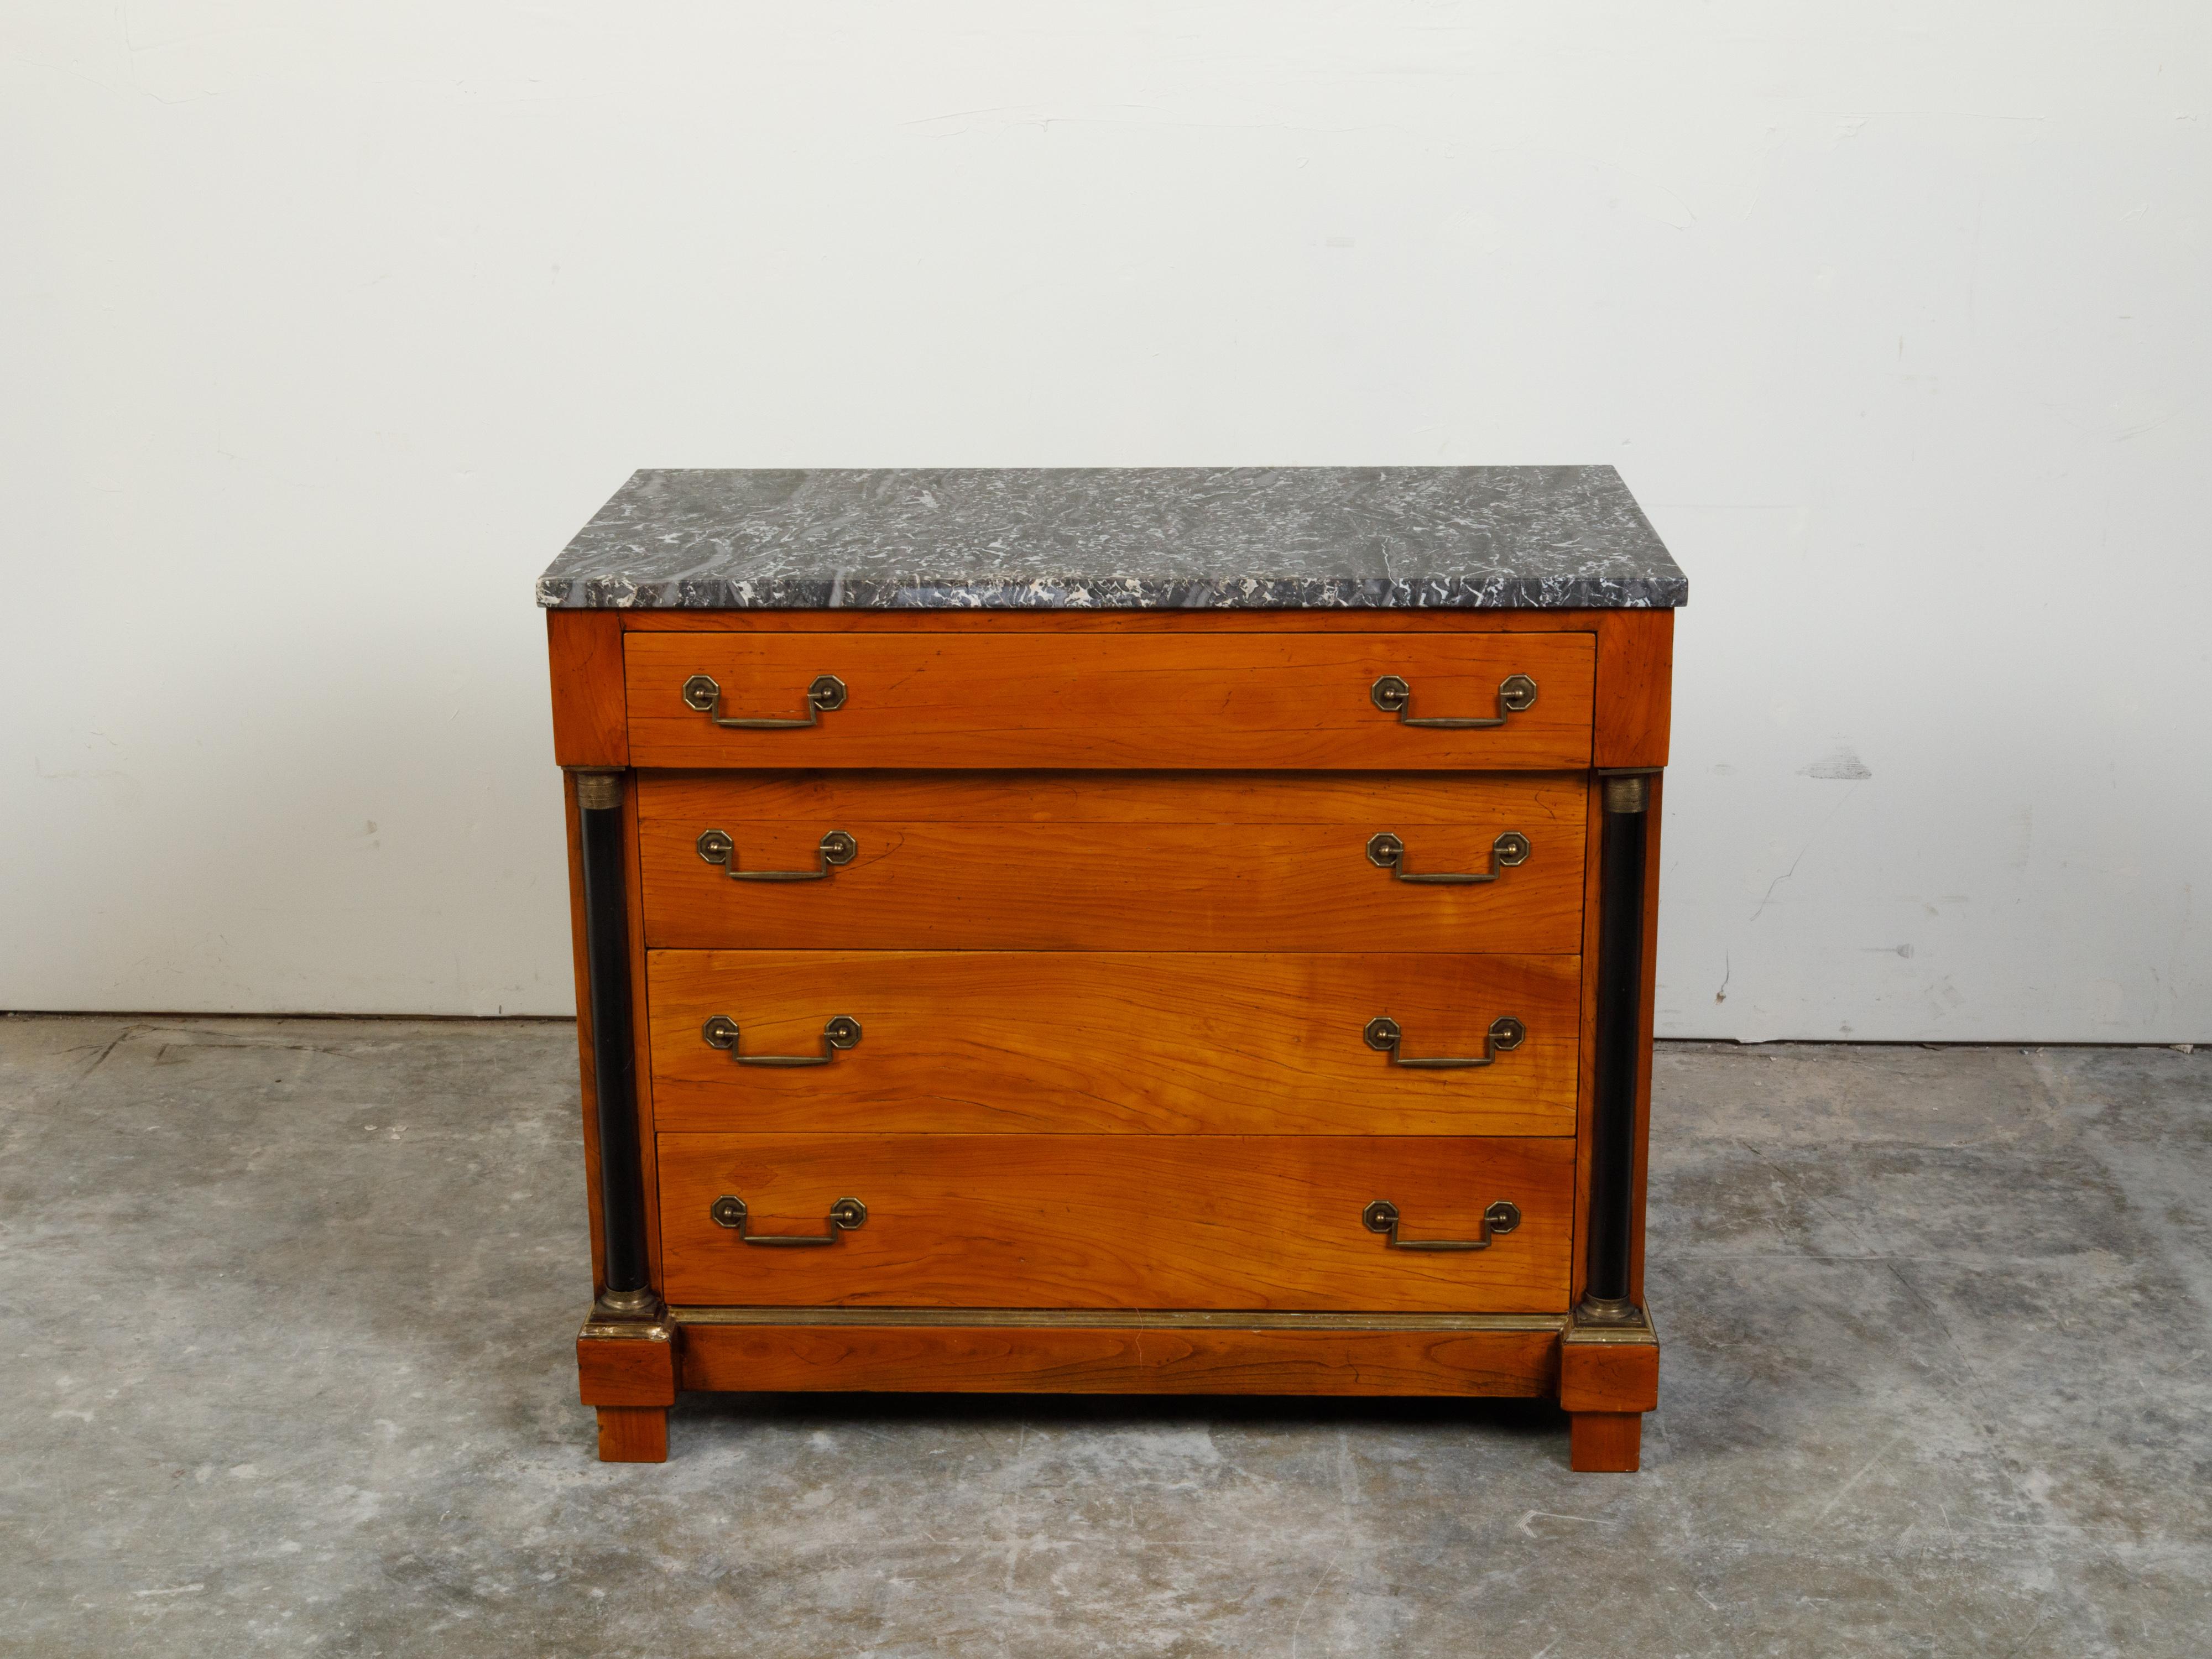 A French Empire style walnut commode from the early 20th century, with grey veined marble top four drawers and black columns. Created in France during the second quarter of the 20th century, this Empire style commode features a rectangular grey